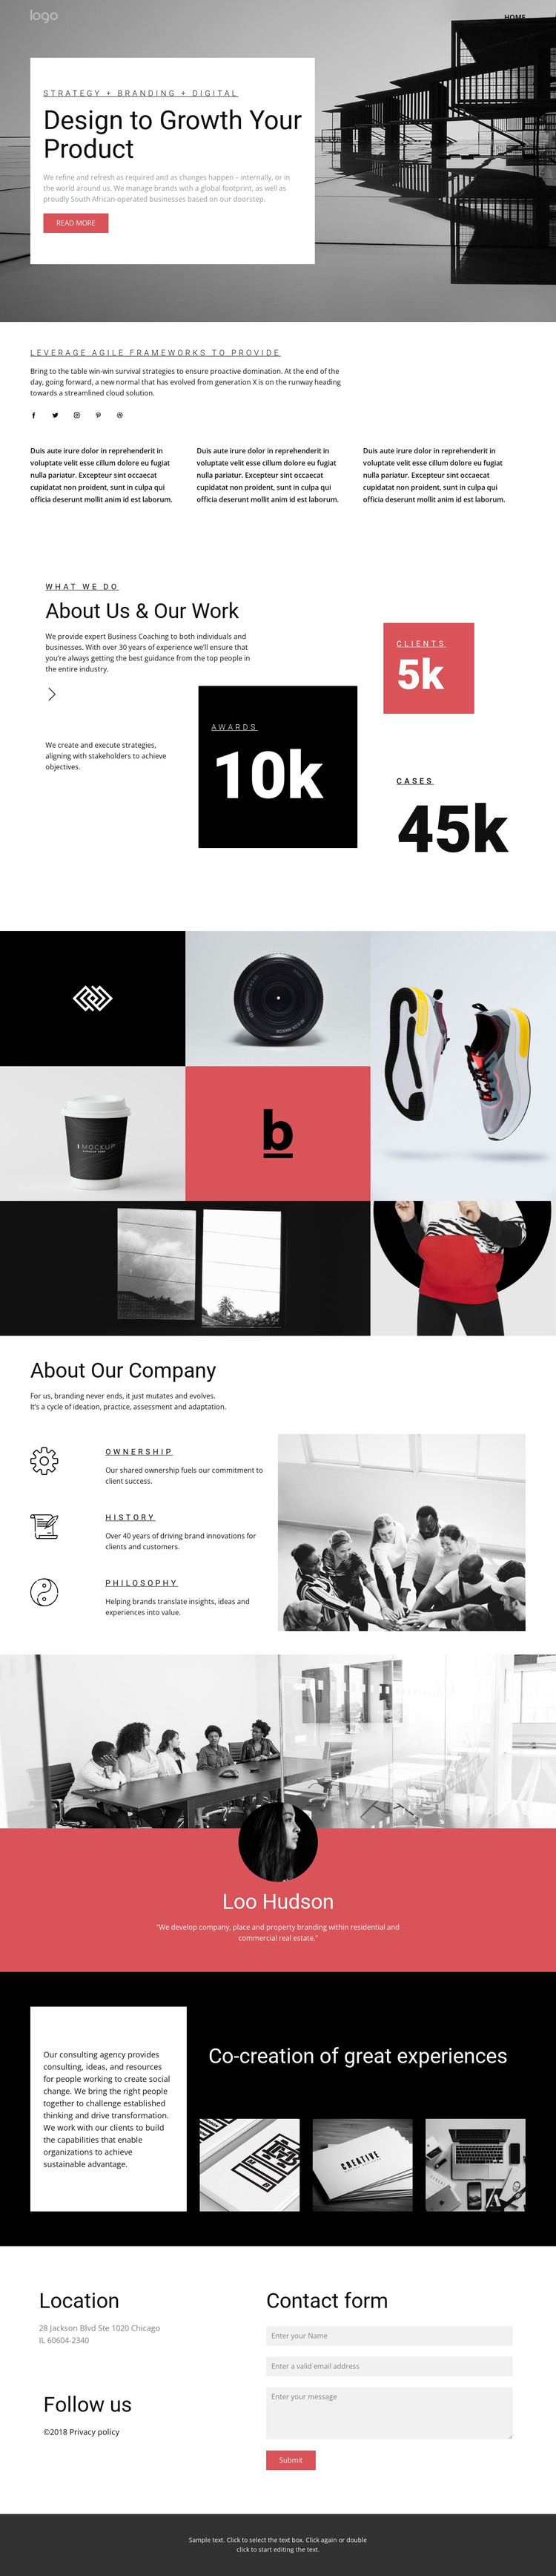 Business growth agency Web Design